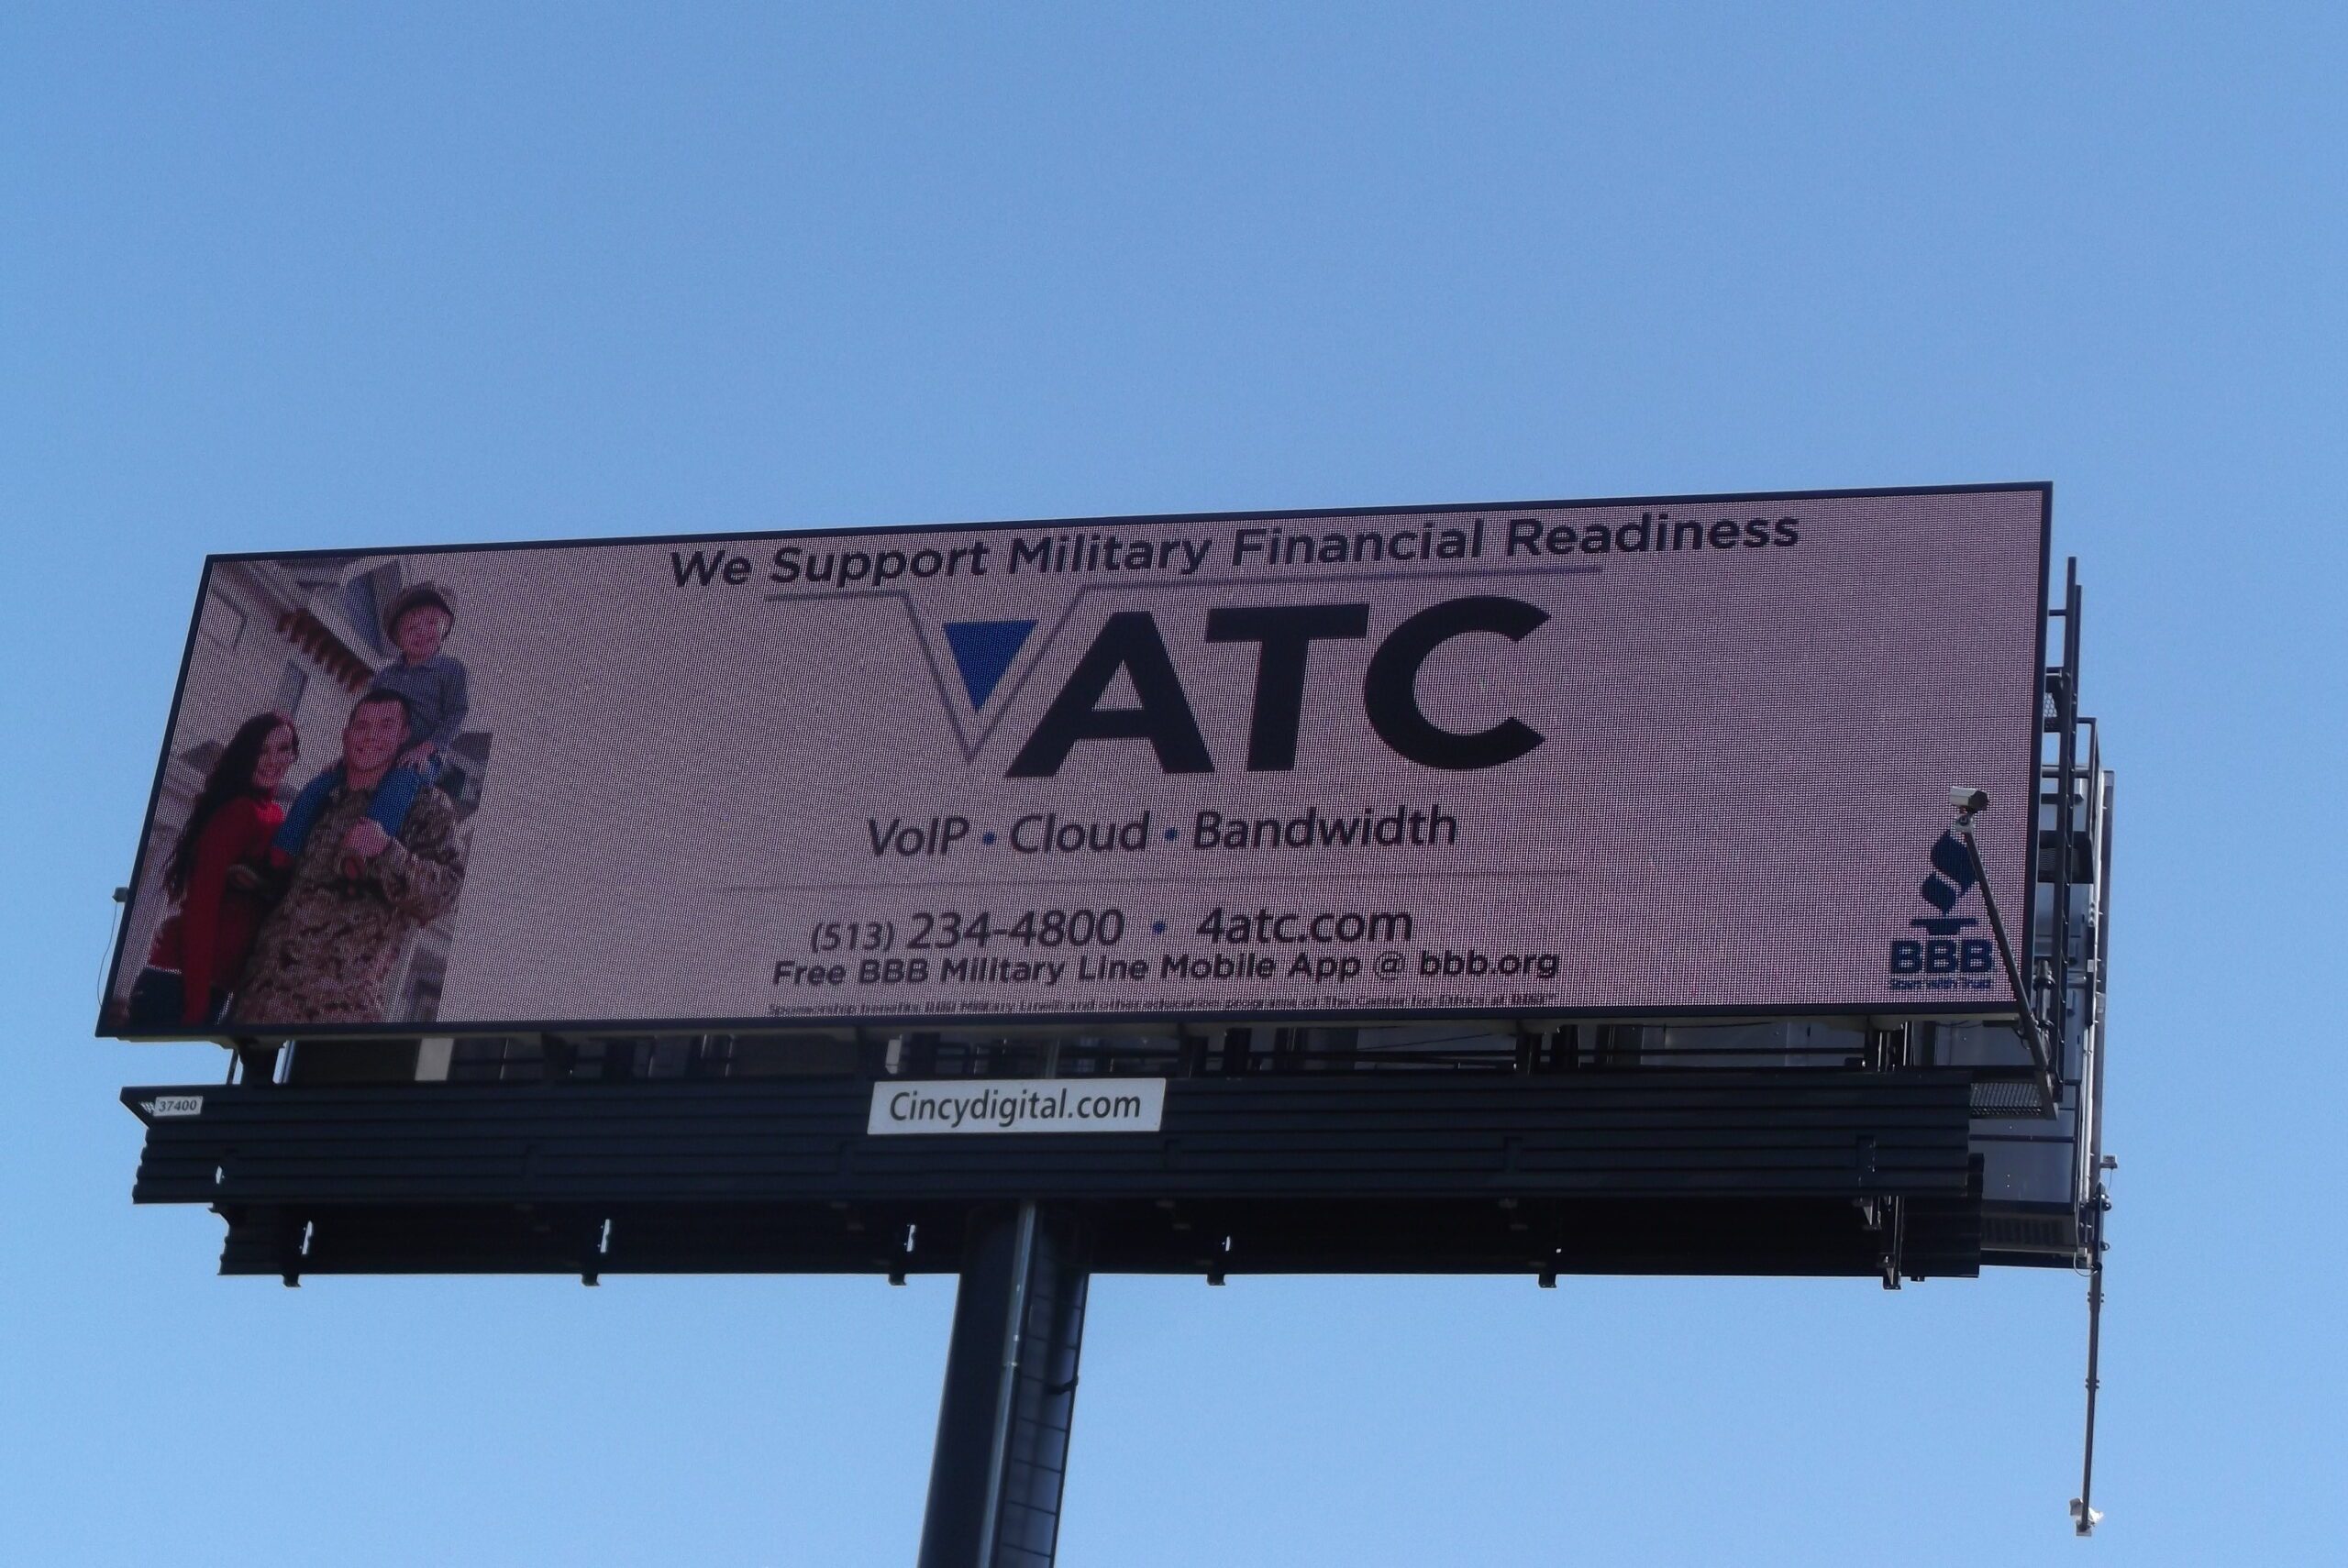 BBB Military ATCBillboard1 - ATC Supports Military Financial Readiness